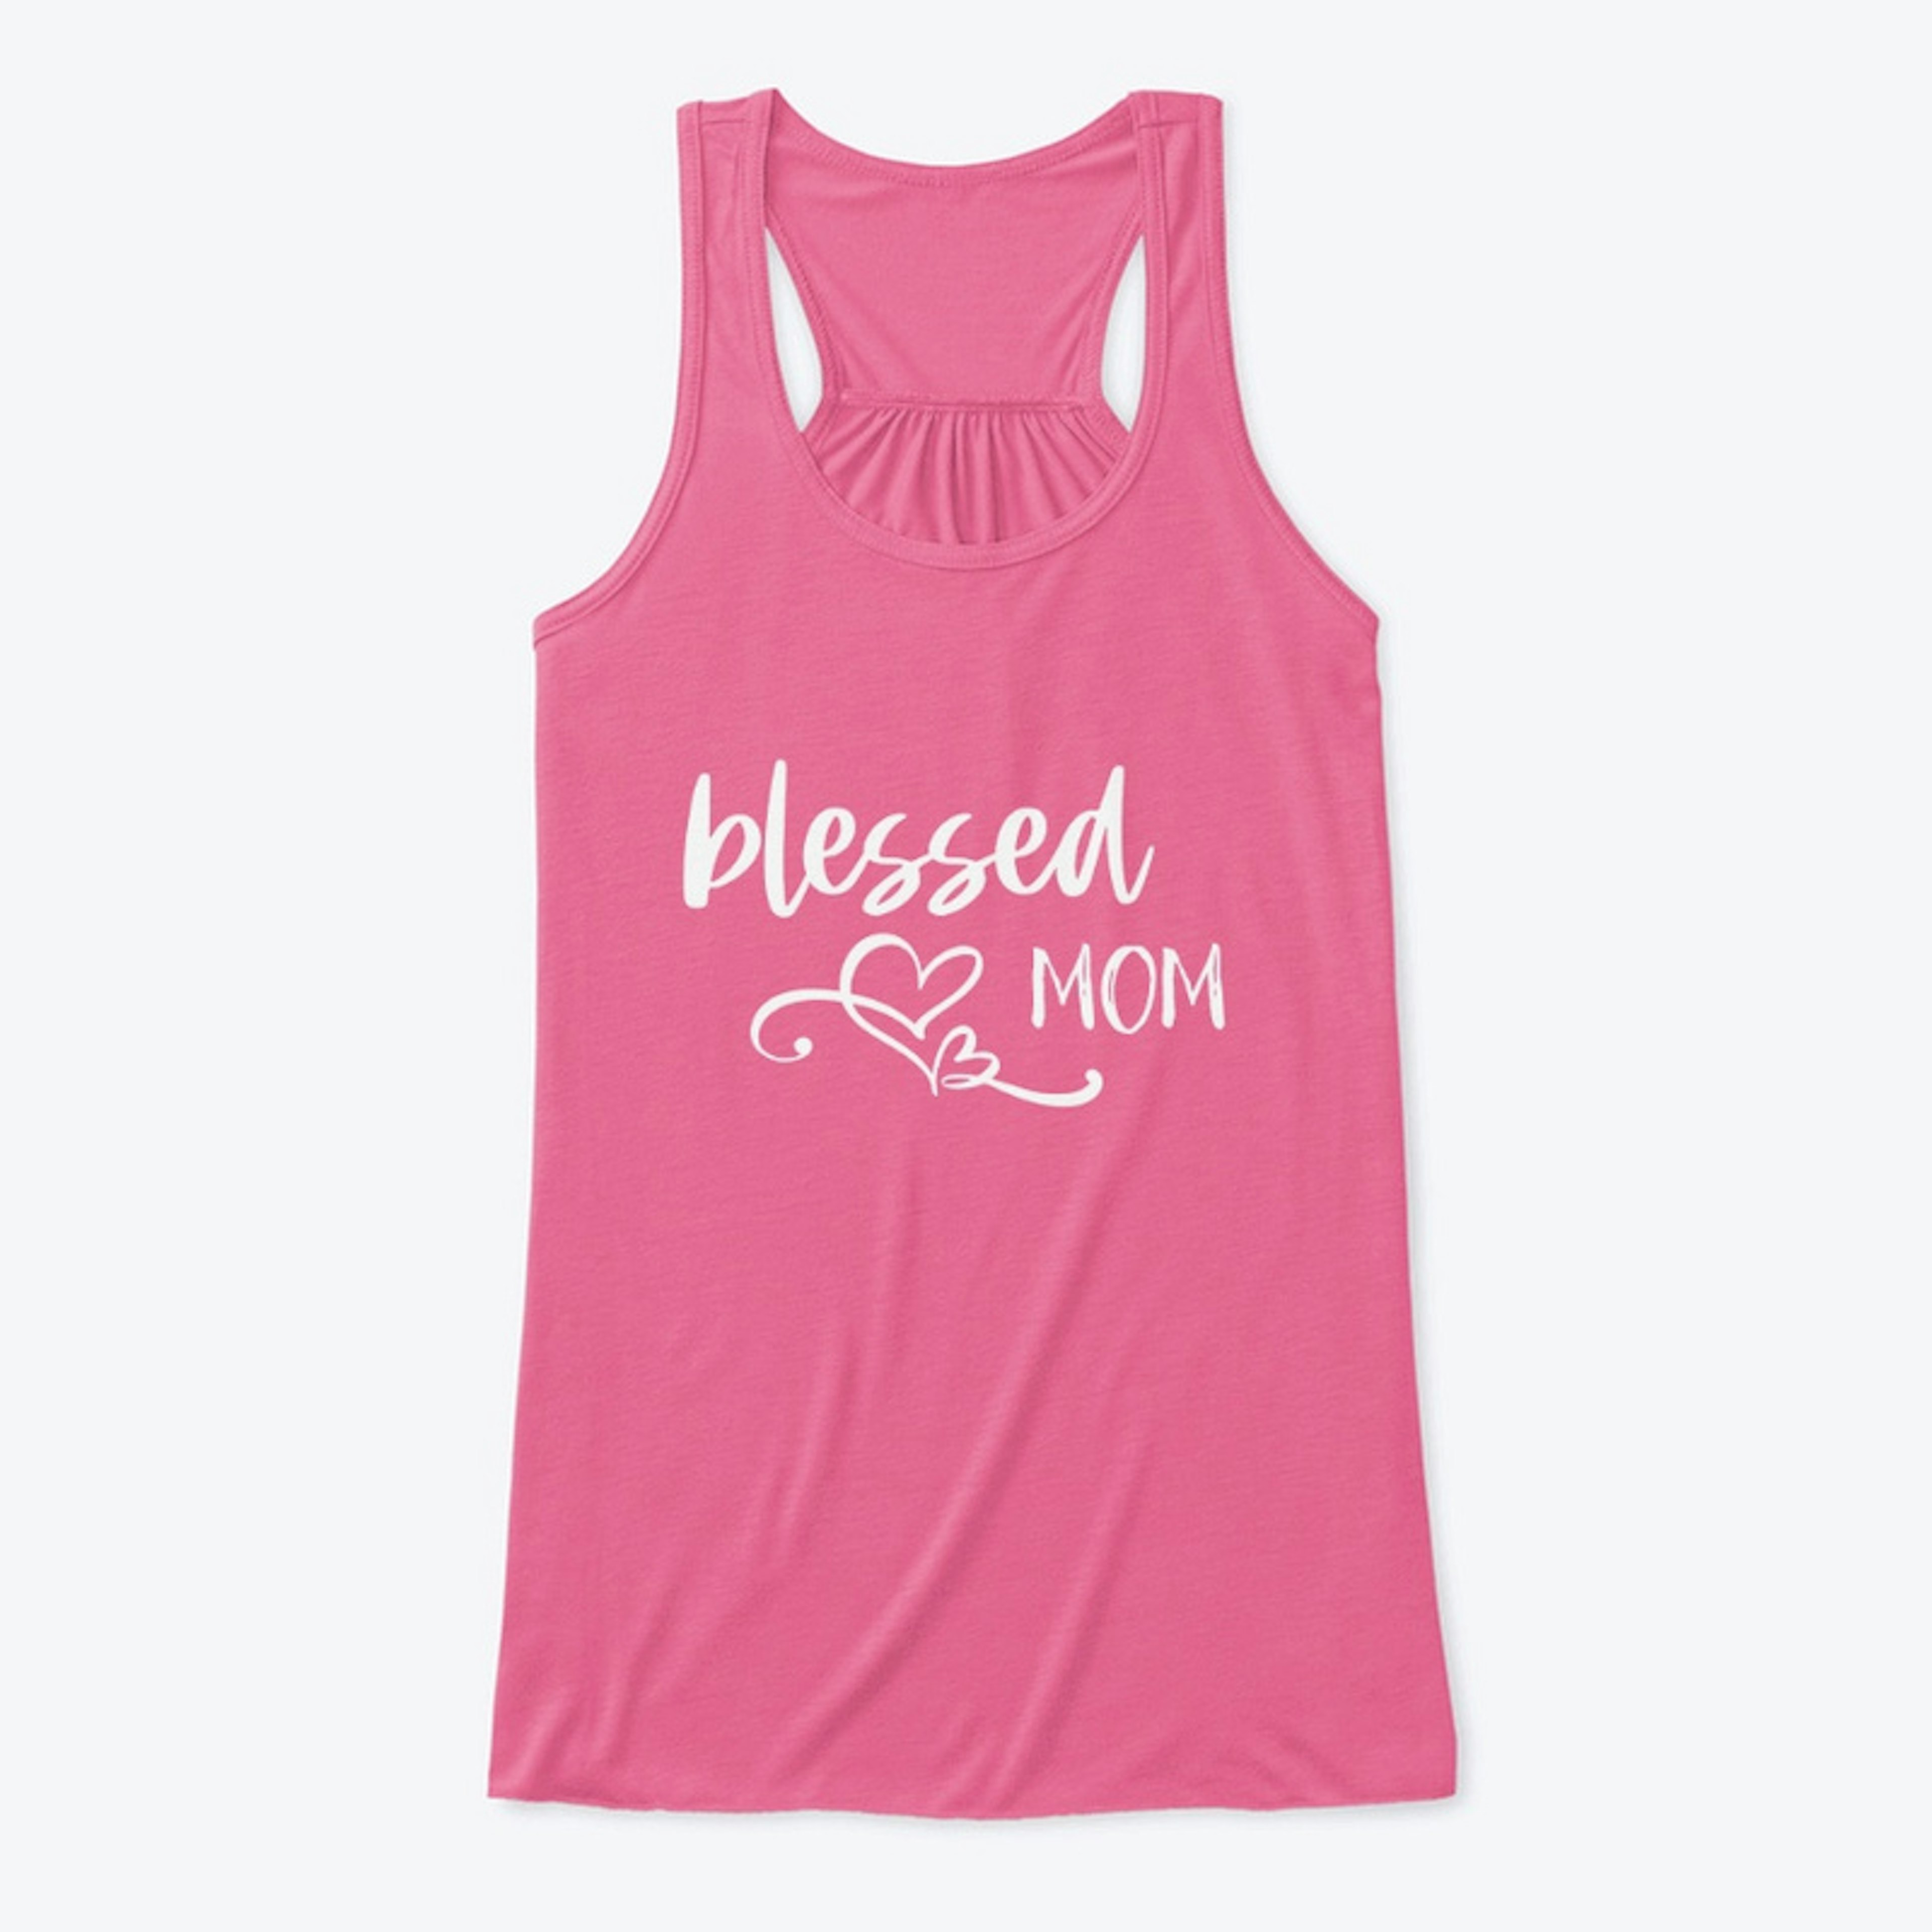 Blessed Mom with Heart Graphic T-Shirt